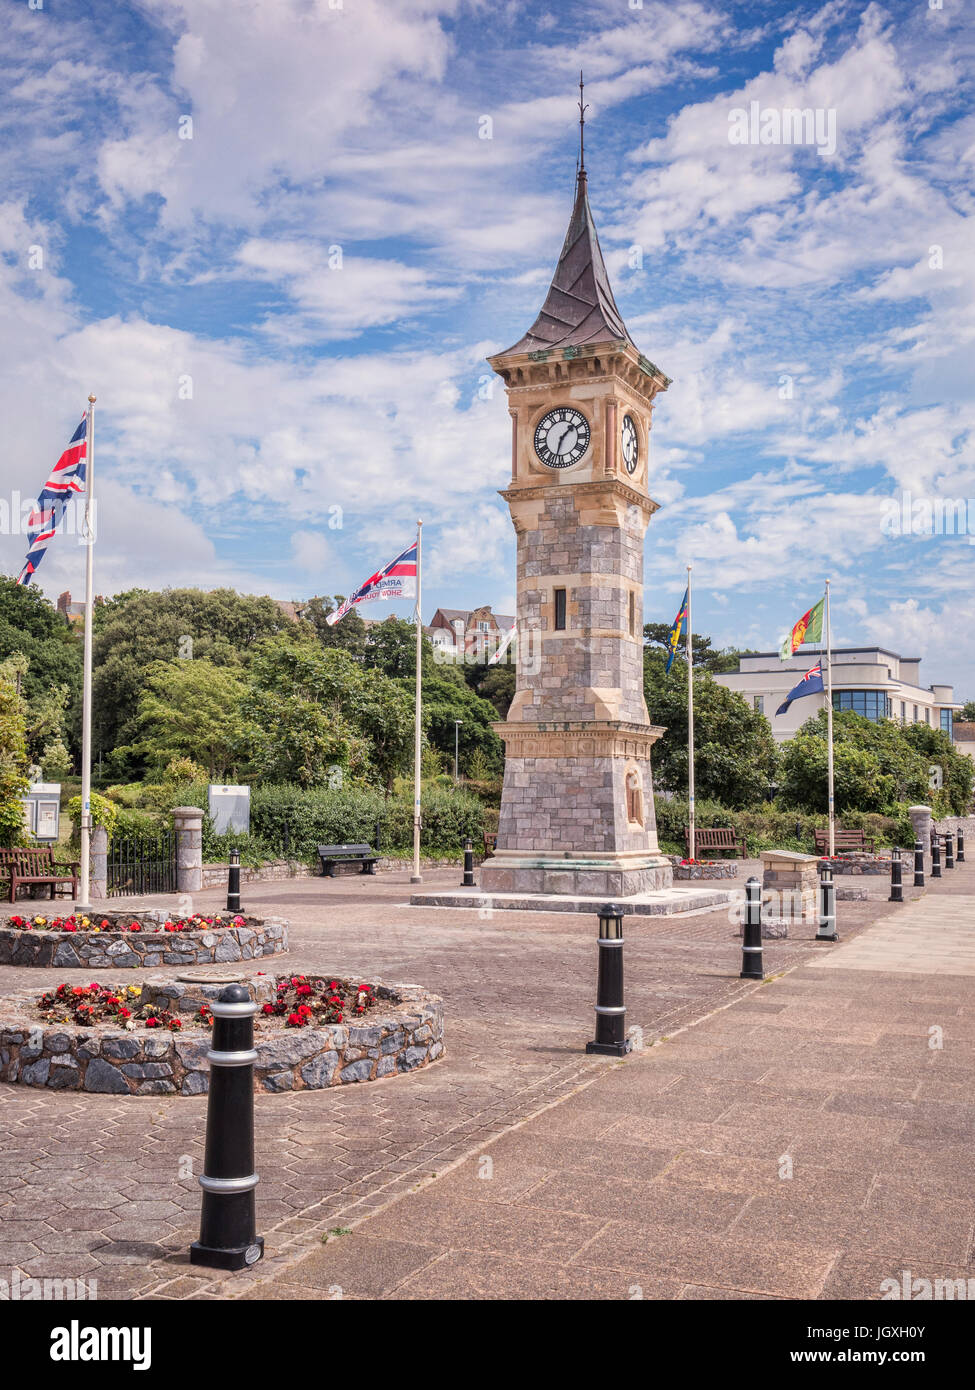 26 June 2017: Exmouth, Devon, UK - The Jubilee Clock Tower on the Esplanade at Exmouth, Devon, with flags flying for Armed Forces Day. Stock Photo